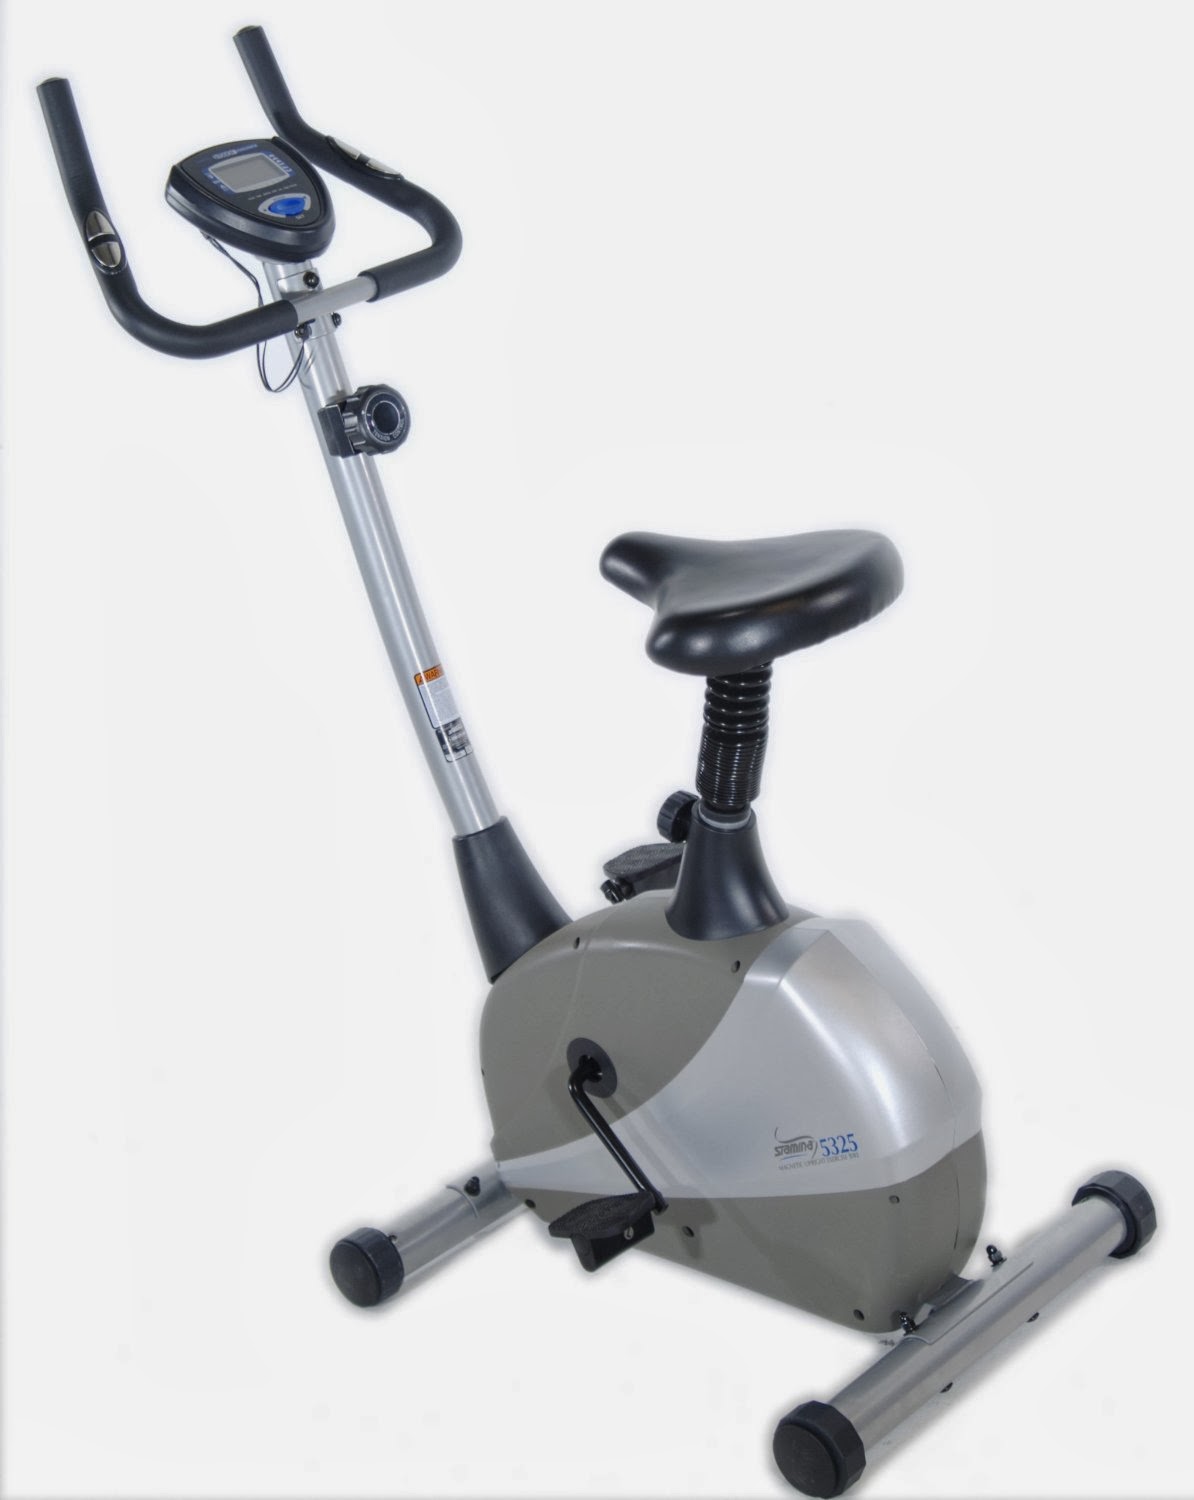 Stamina 5325 Magnetic REsistance Upright Exercise Bike, review of features